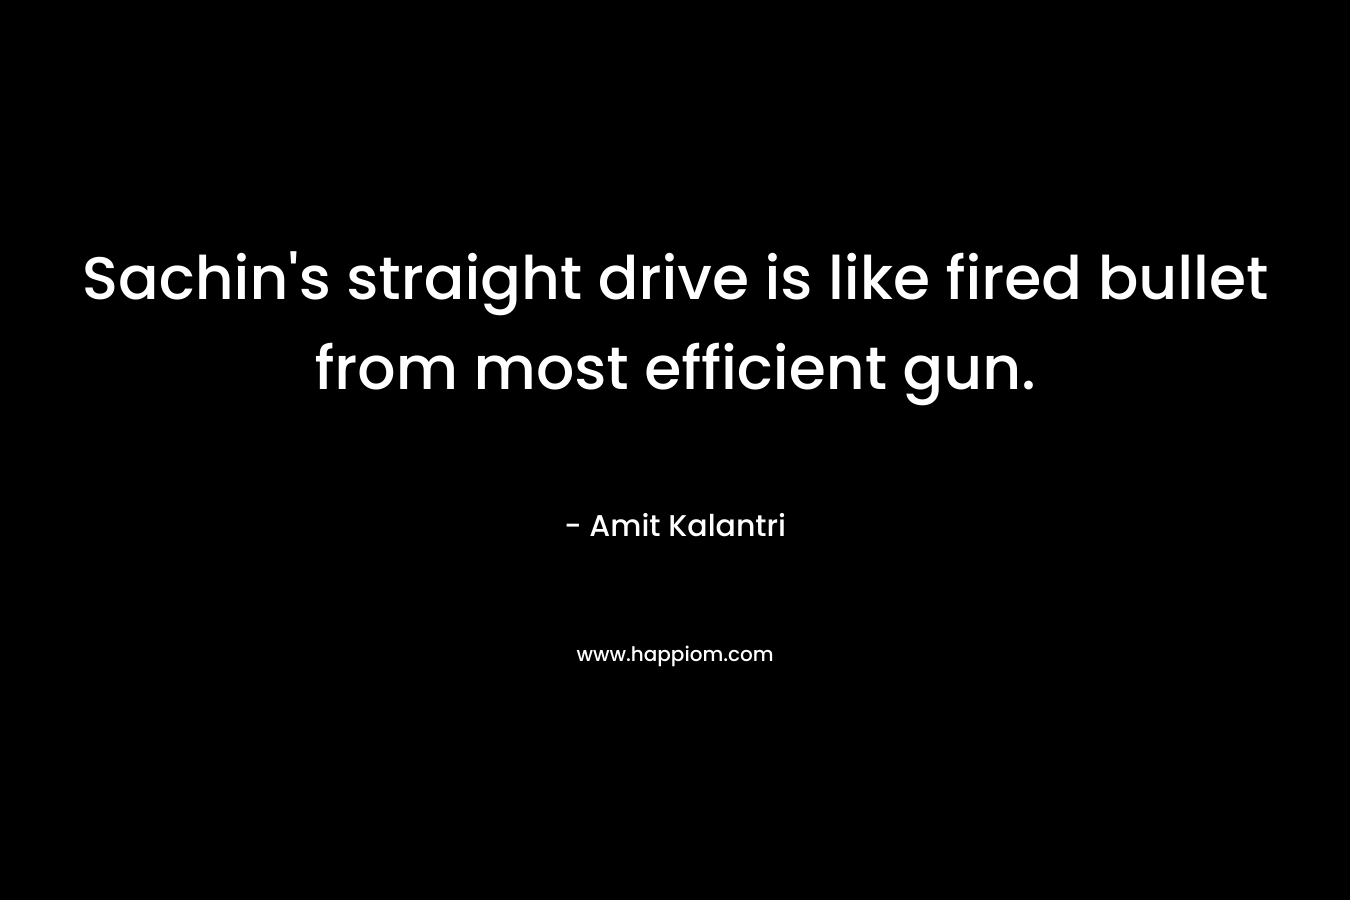 Sachin’s straight drive is like fired bullet from most efficient gun. – Amit Kalantri